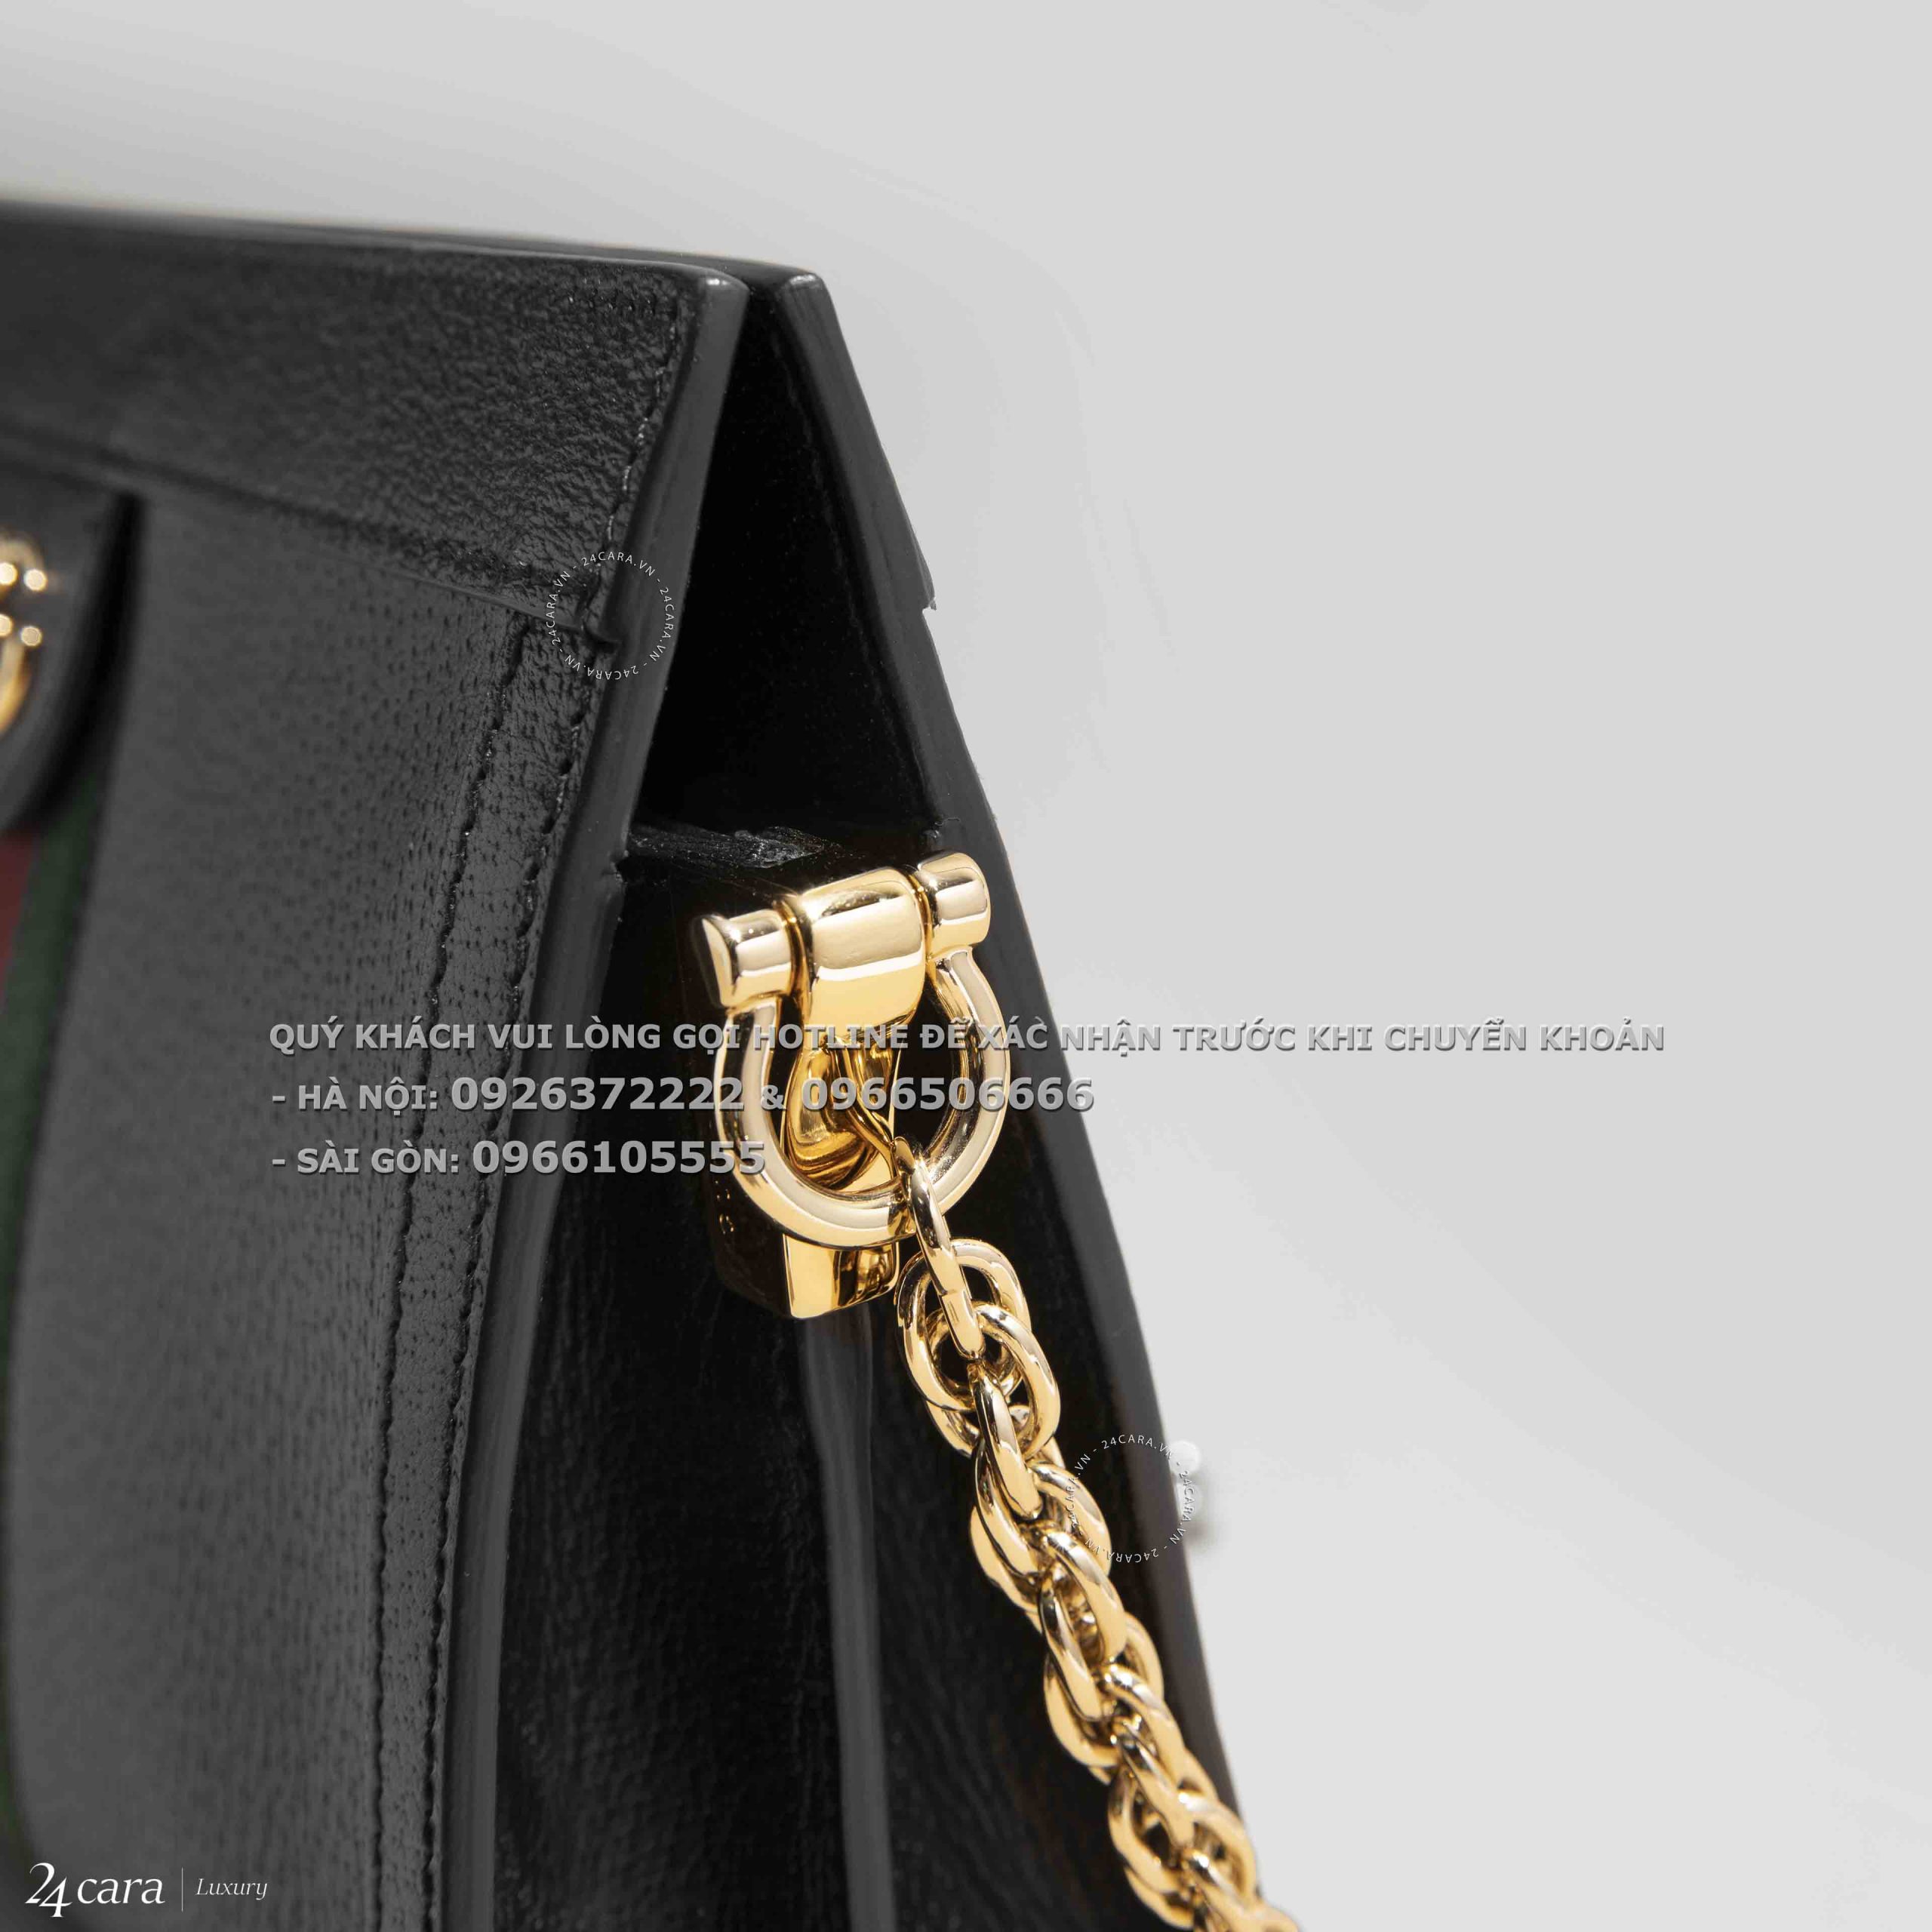 GUCCI OPHIDIA GG SMALL SHOULDER BAG